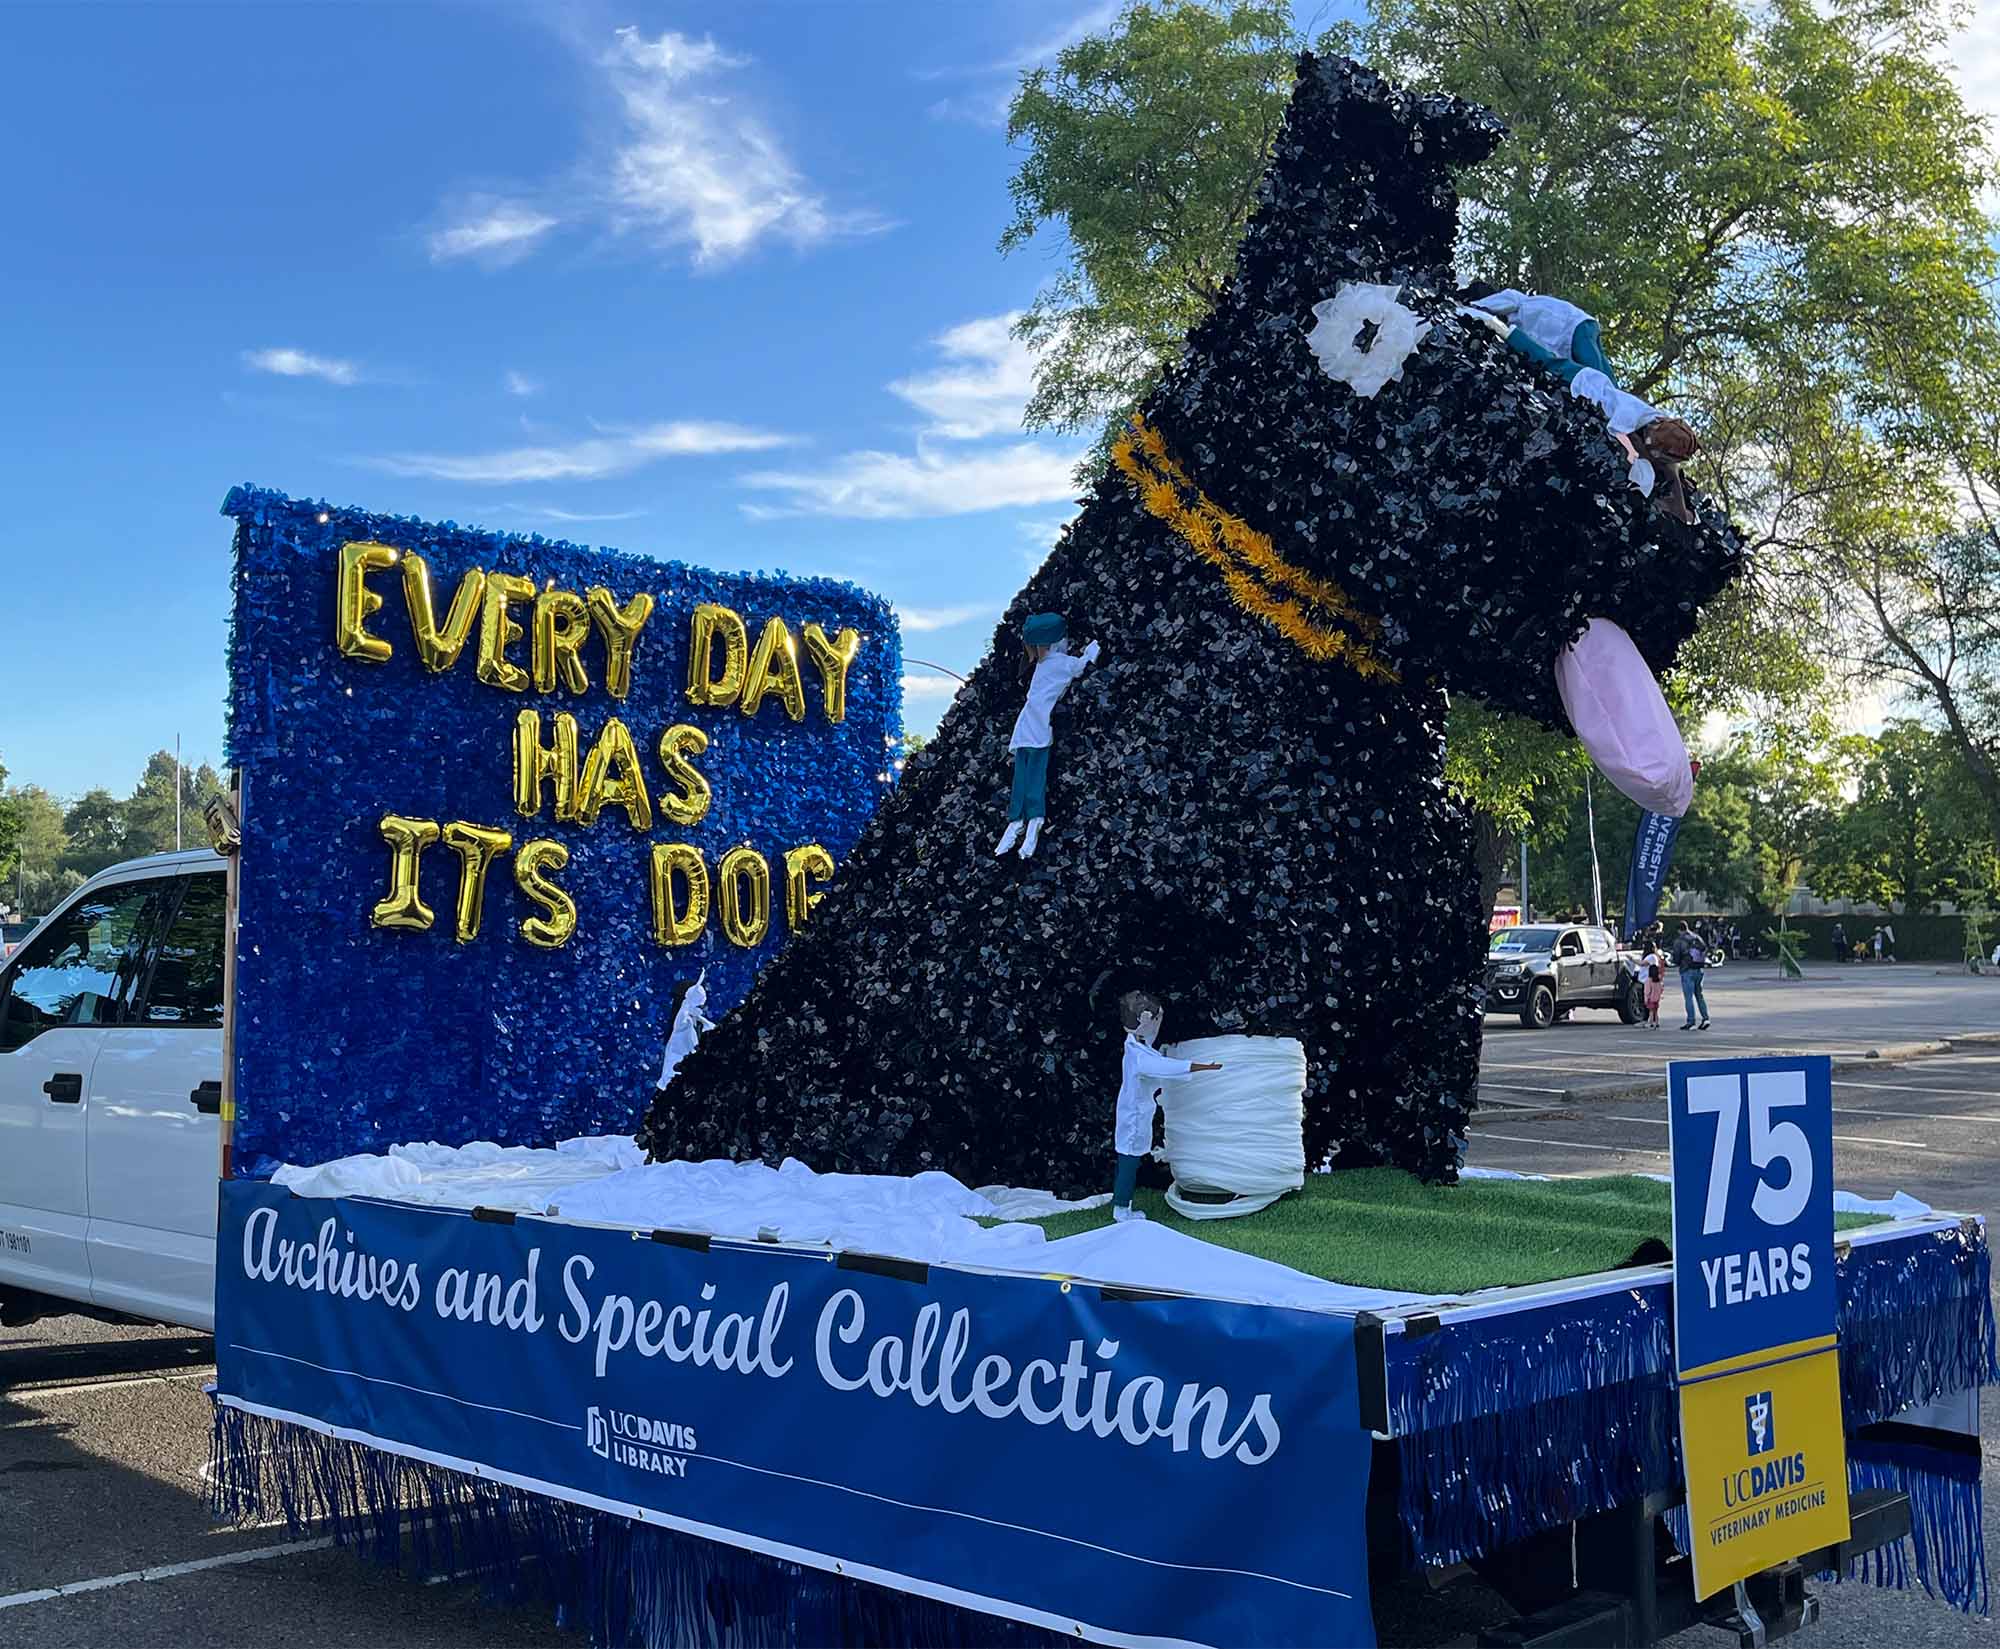 Parade float with dog and text: Every day has its dog